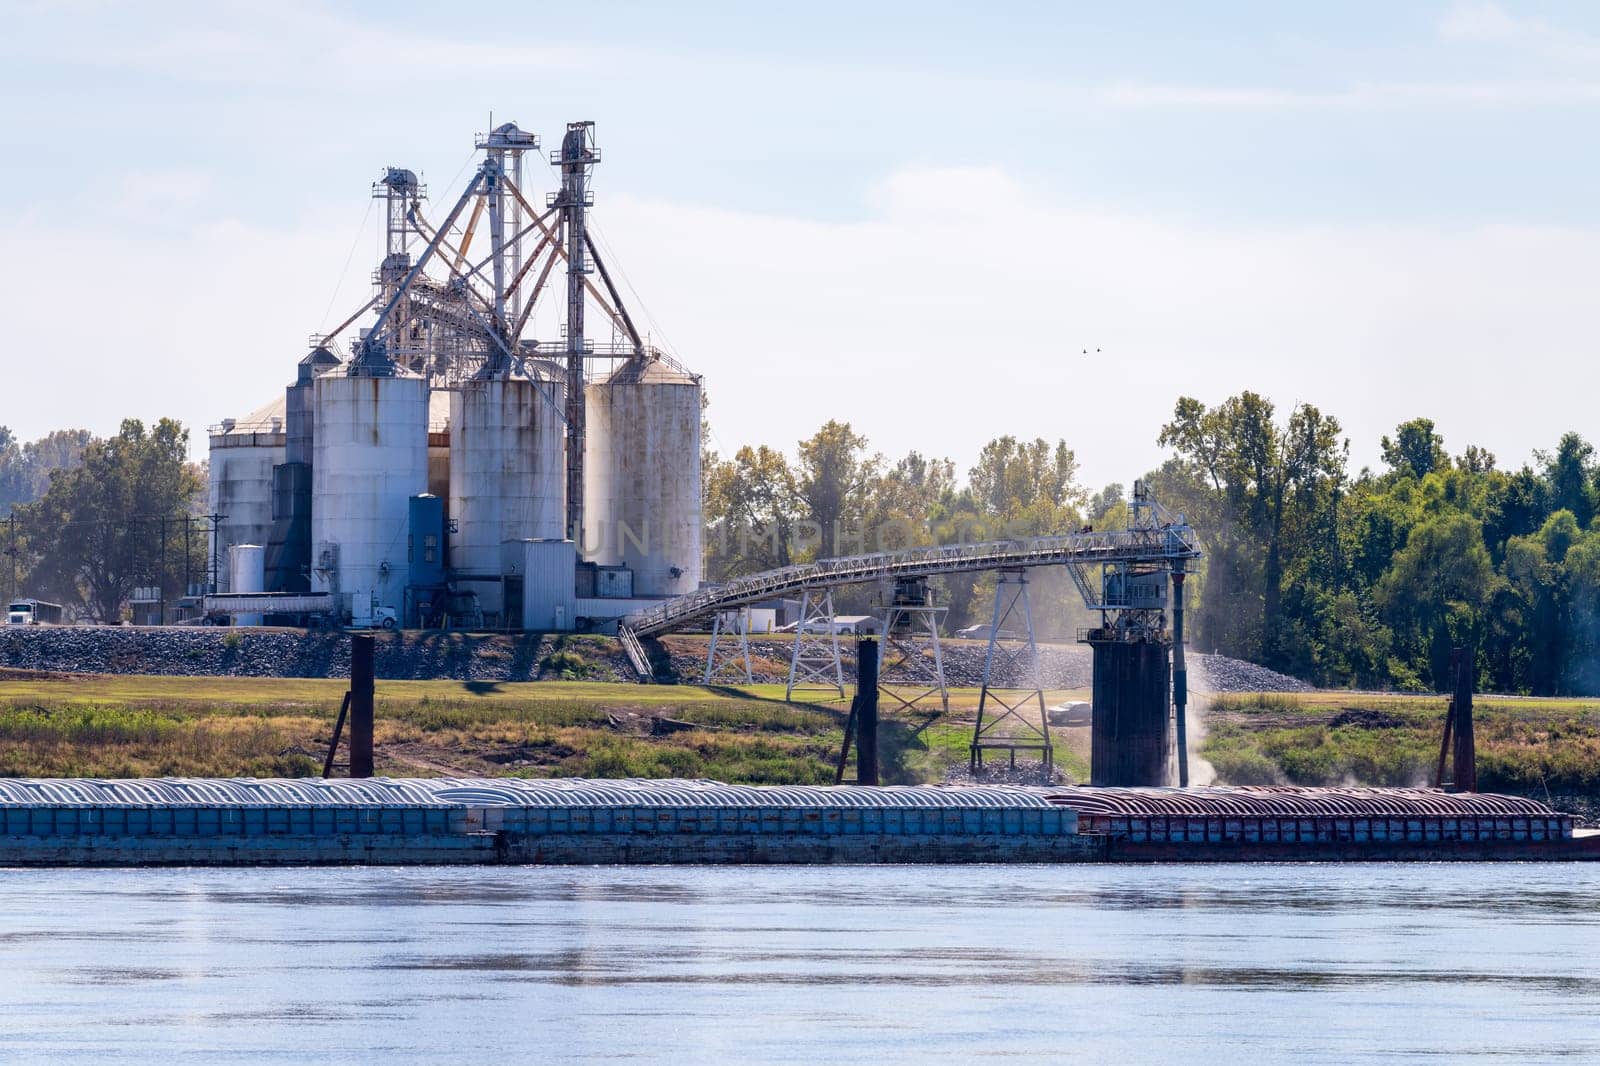 Grain being loaded into freight barges on lower Mississippi river by steheap